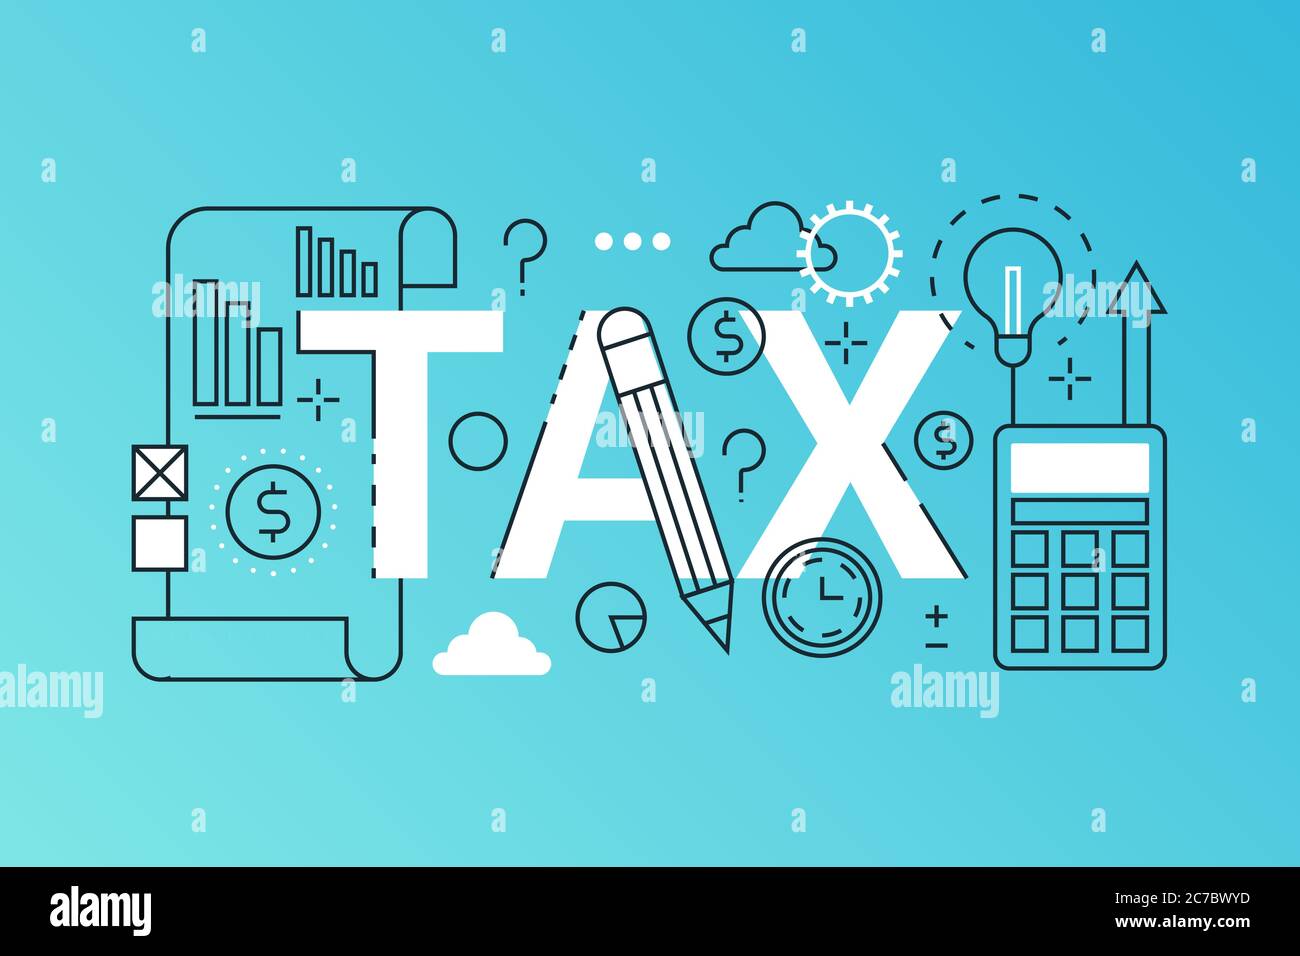 Tax word trendy composition banner. Outline stroke tax payments, financial law consulting, refund, business income report. infographic concept. Flat line icons vector header illustration Stock Vector